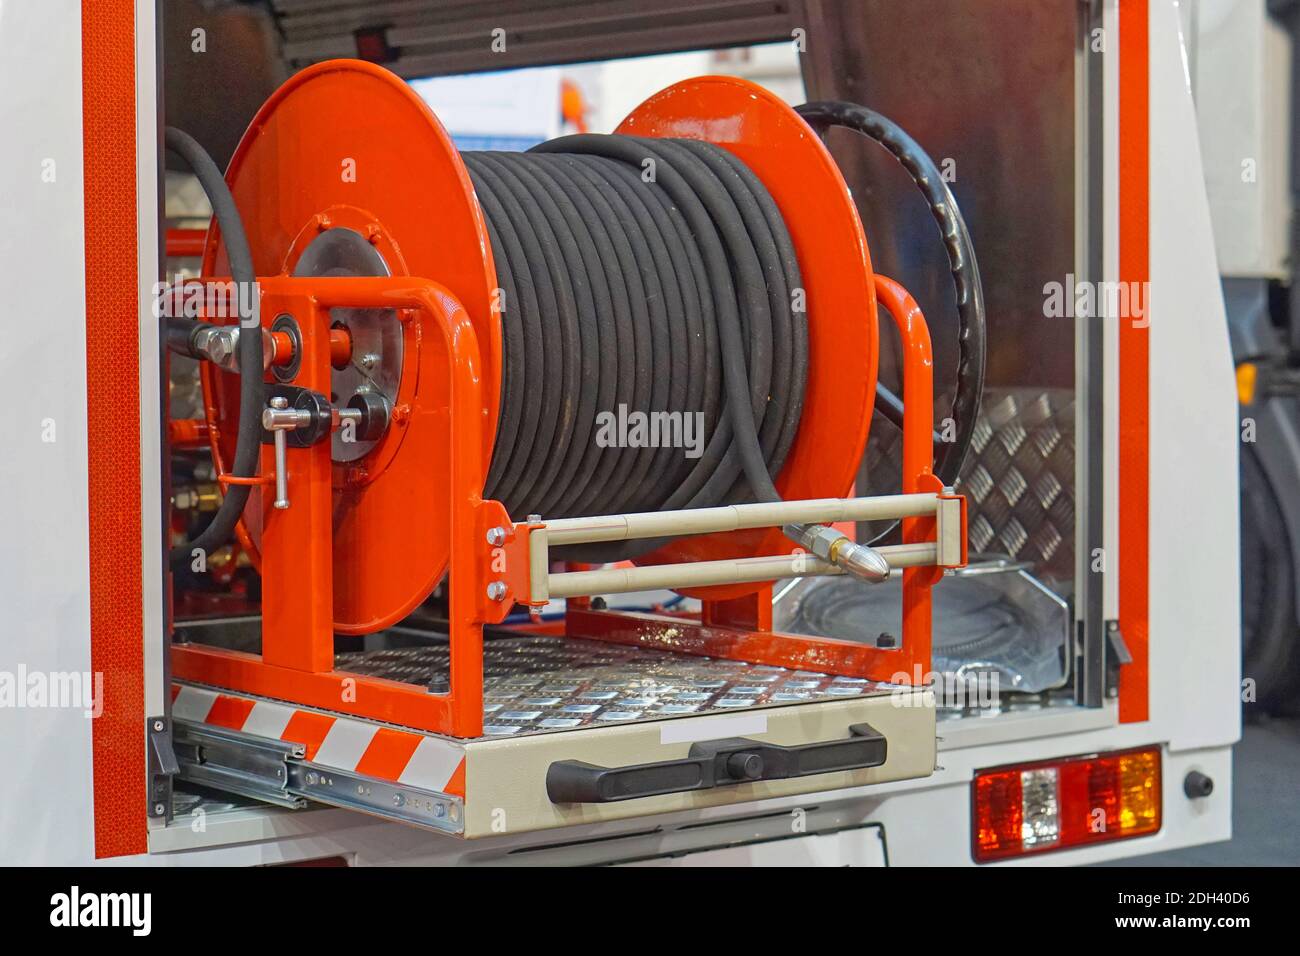 High Pressure fire hose reel at truck engine Stock Photo